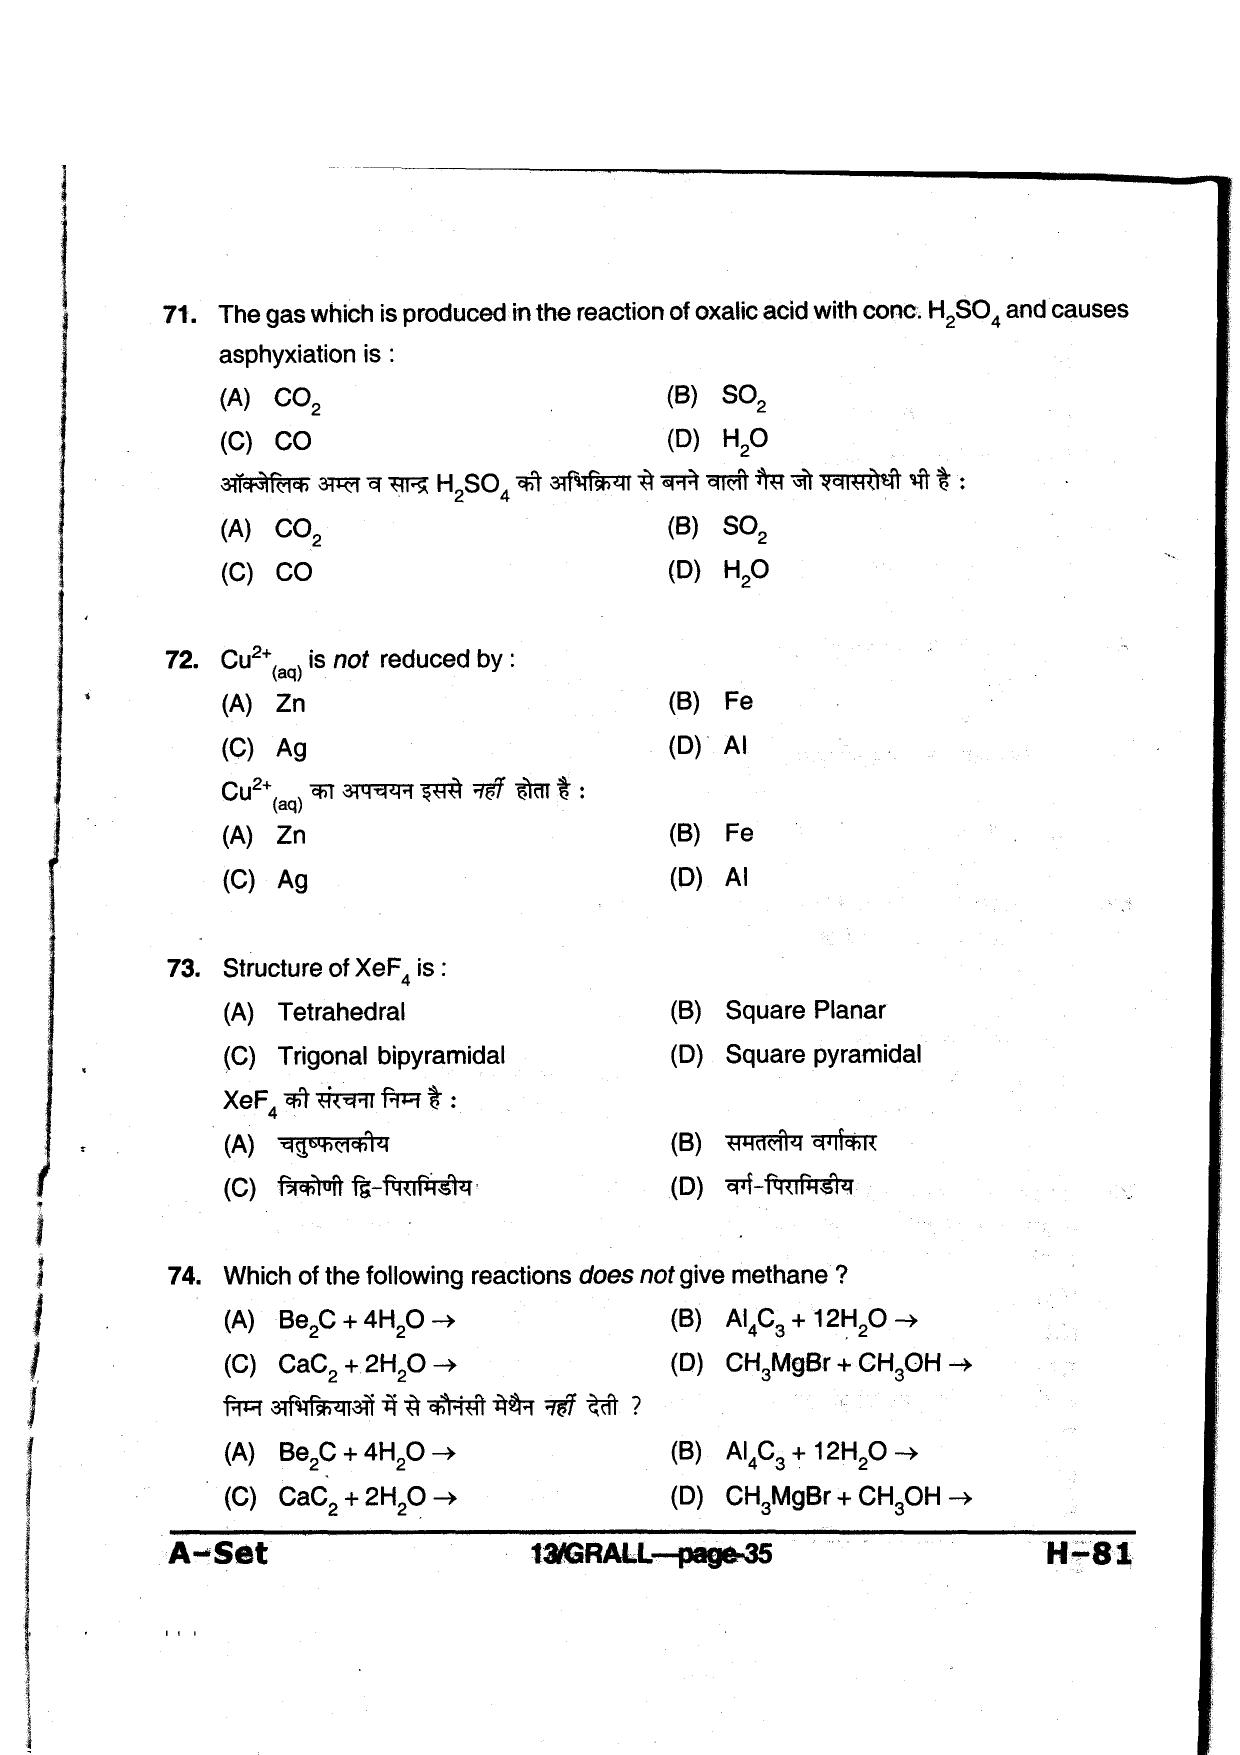 MP PAT 2013 Question Paper - Paper I - Page 35